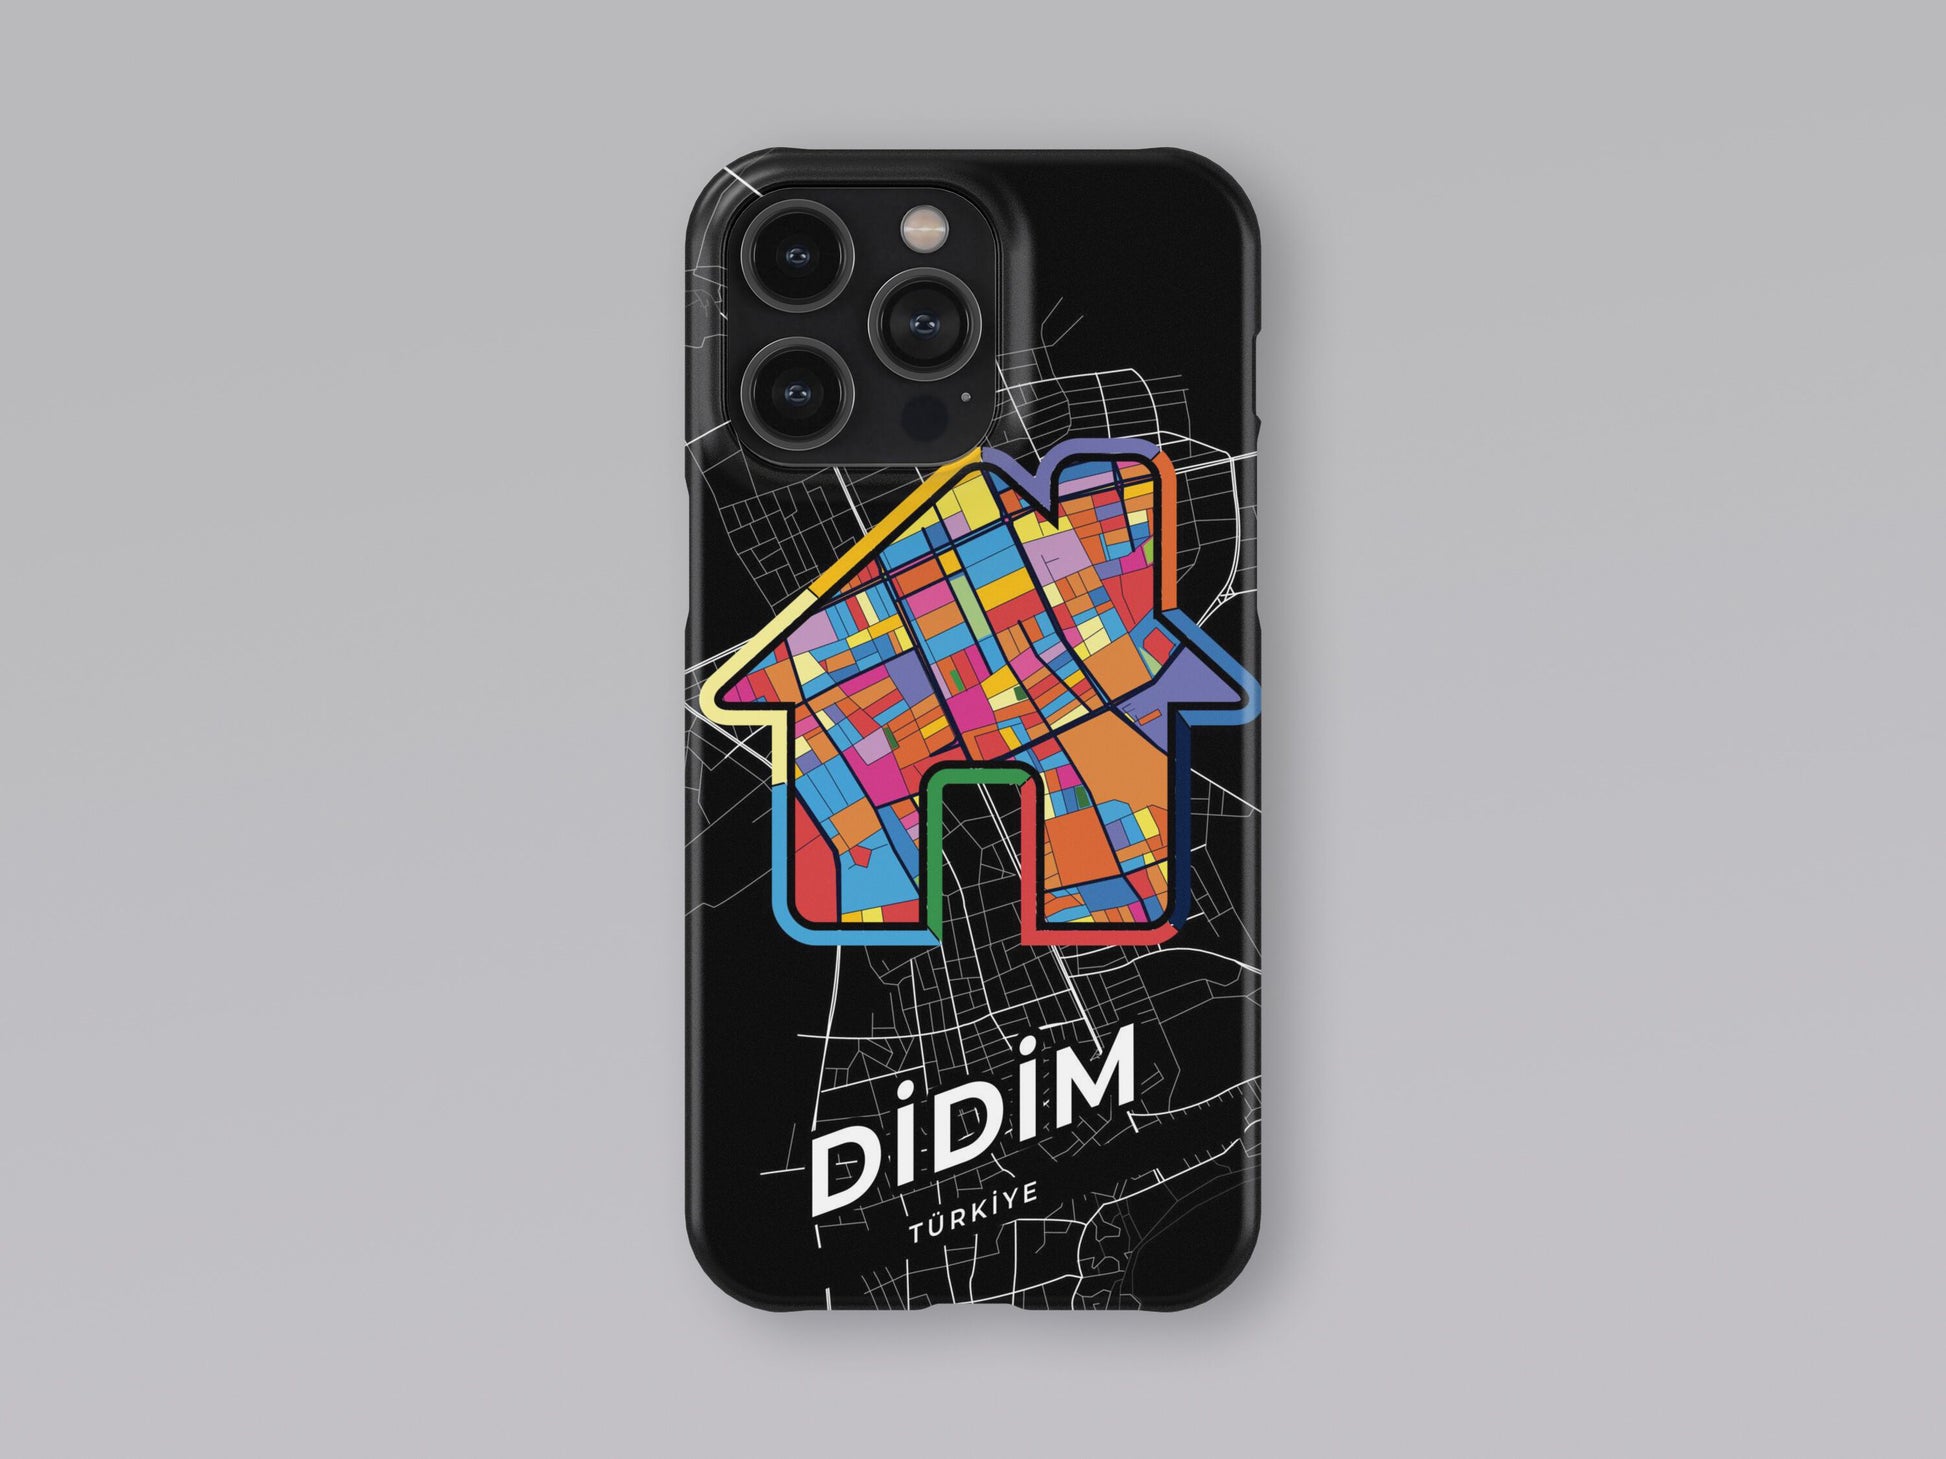 Didim Turkey slim phone case with colorful icon. Birthday, wedding or housewarming gift. Couple match cases. 3